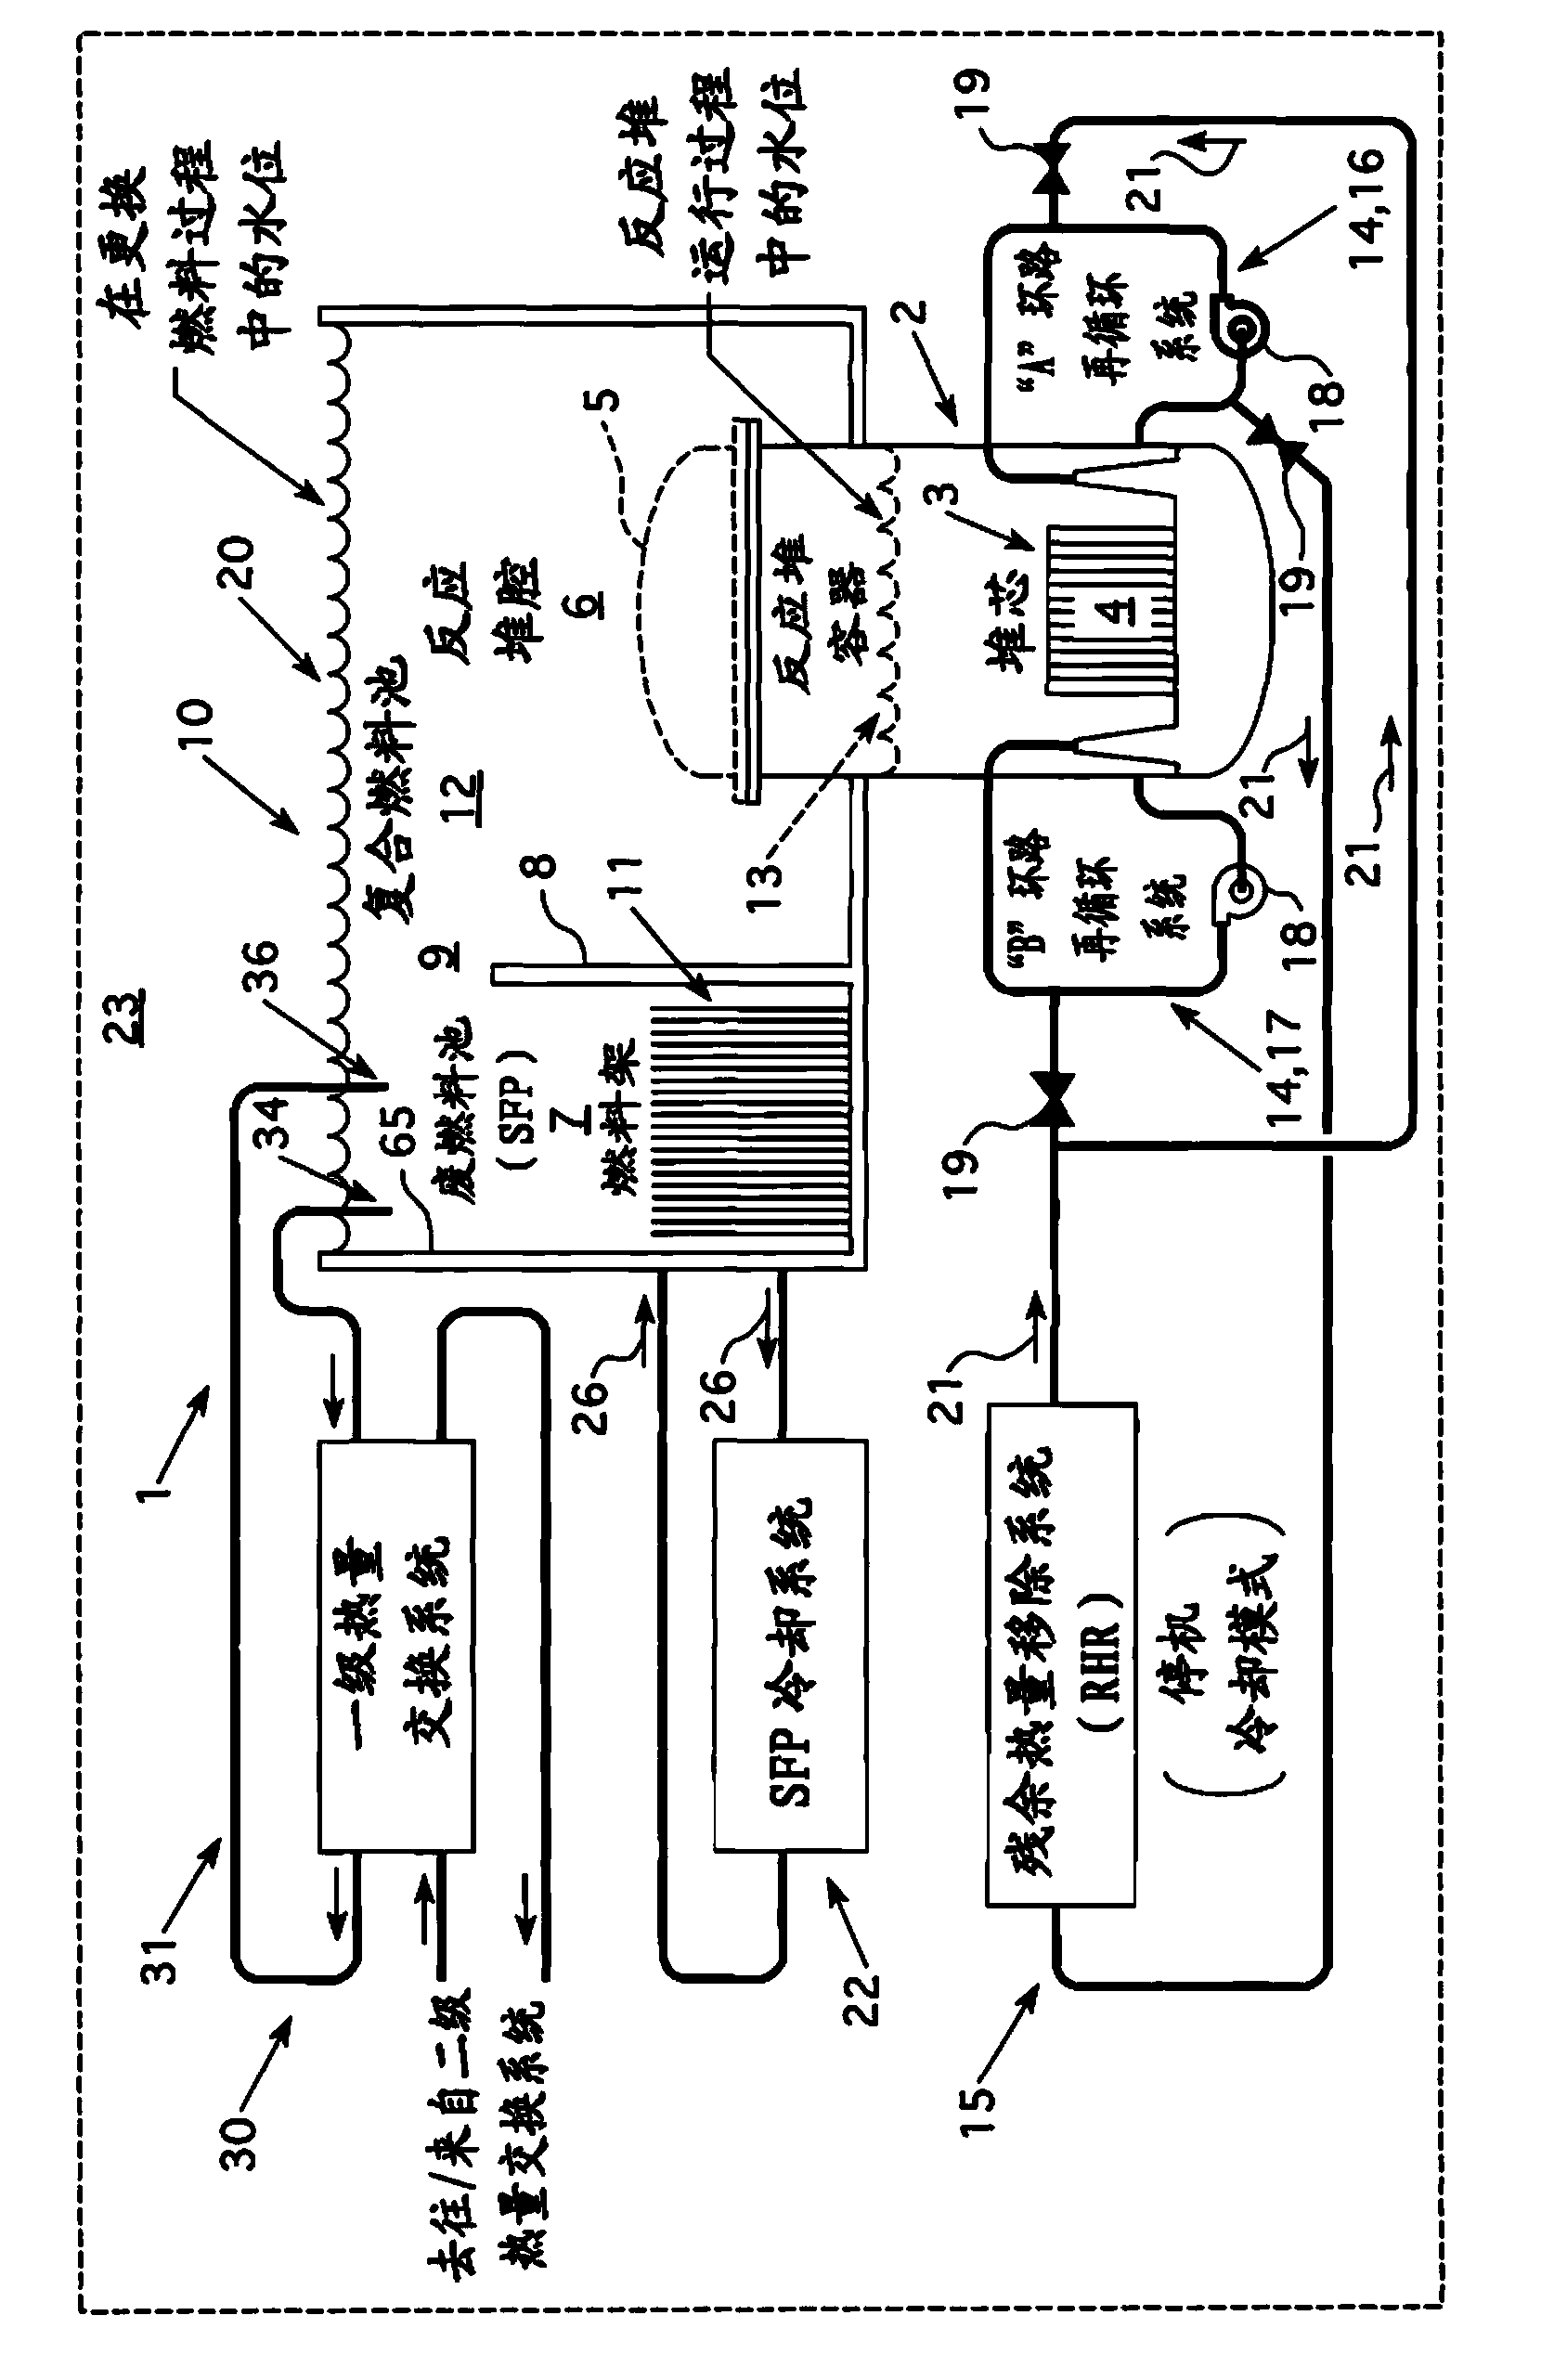 Self-contained emergency spent nuclear fuel pool cooling system